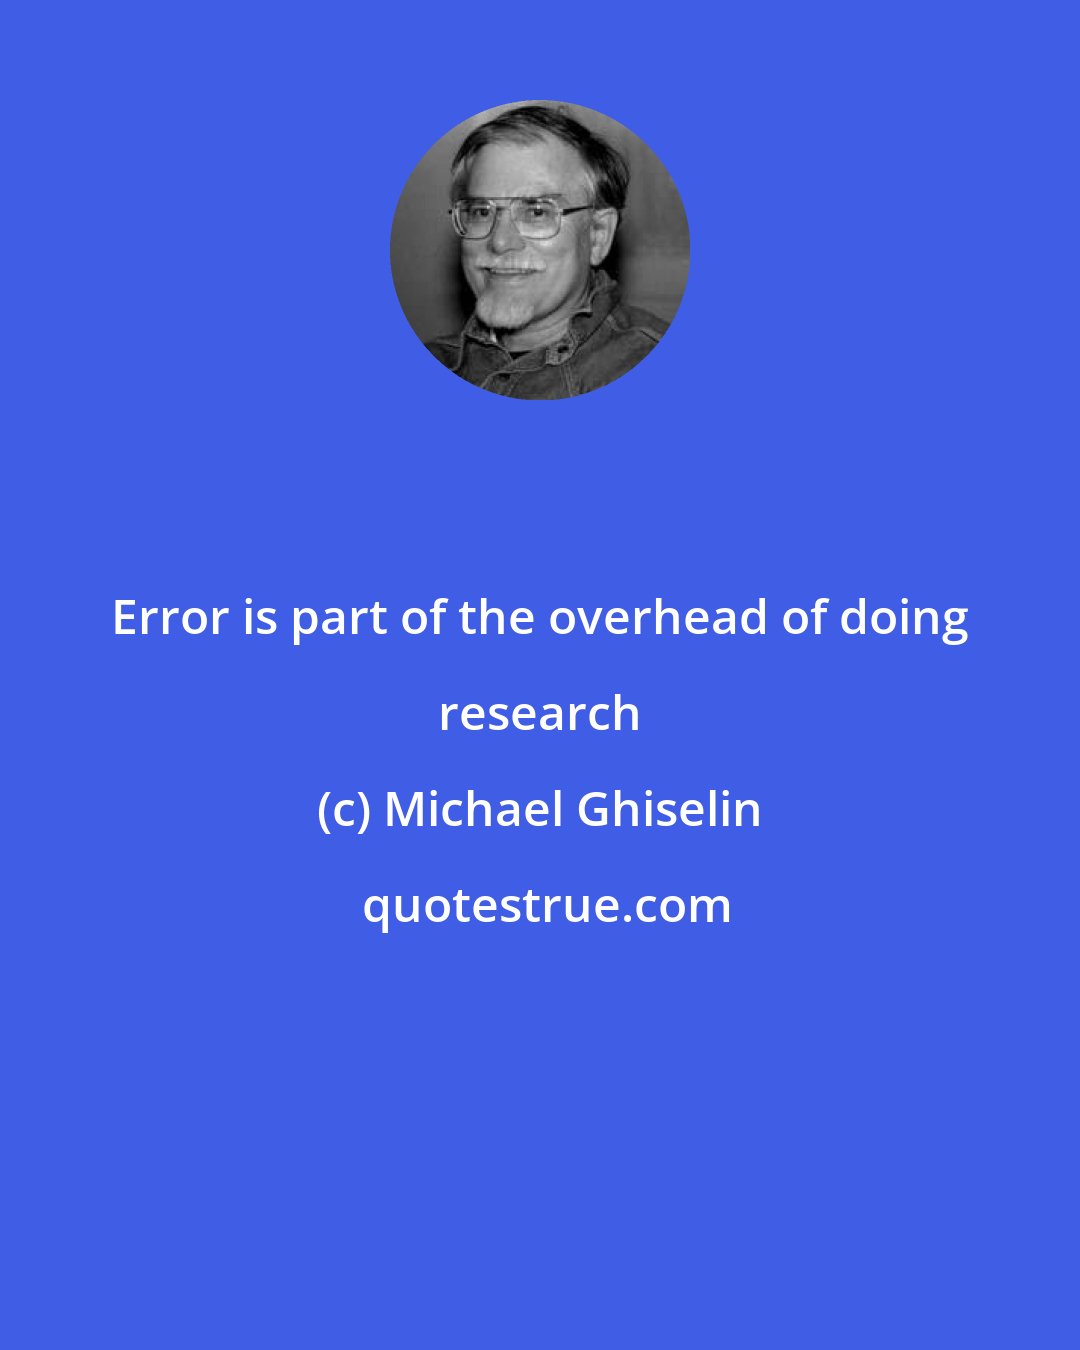 Michael Ghiselin: Error is part of the overhead of doing research